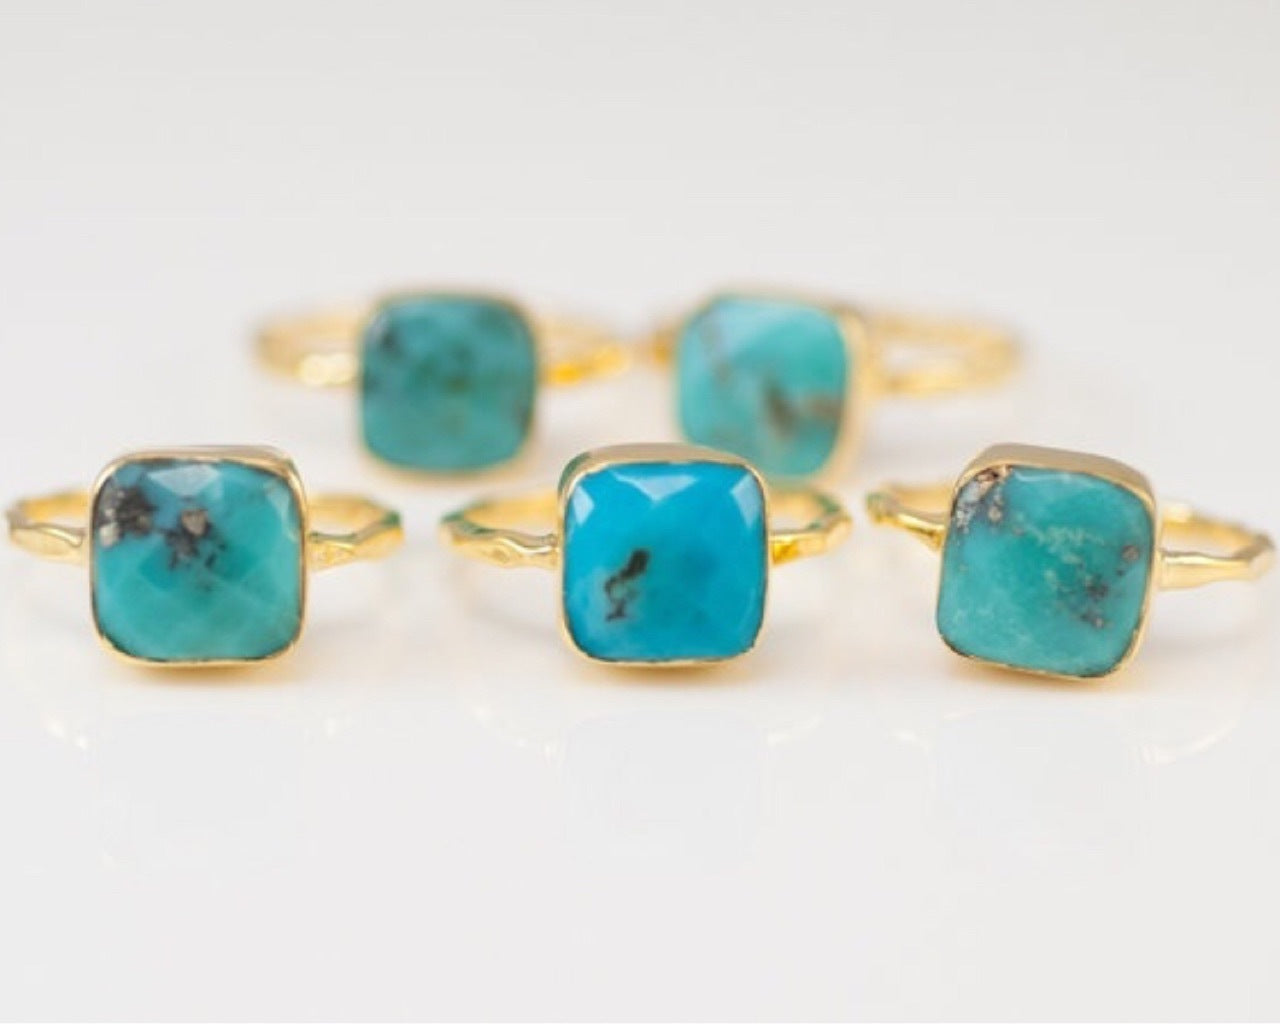 Simple Square Turquoise 18k Gold Plated Ring